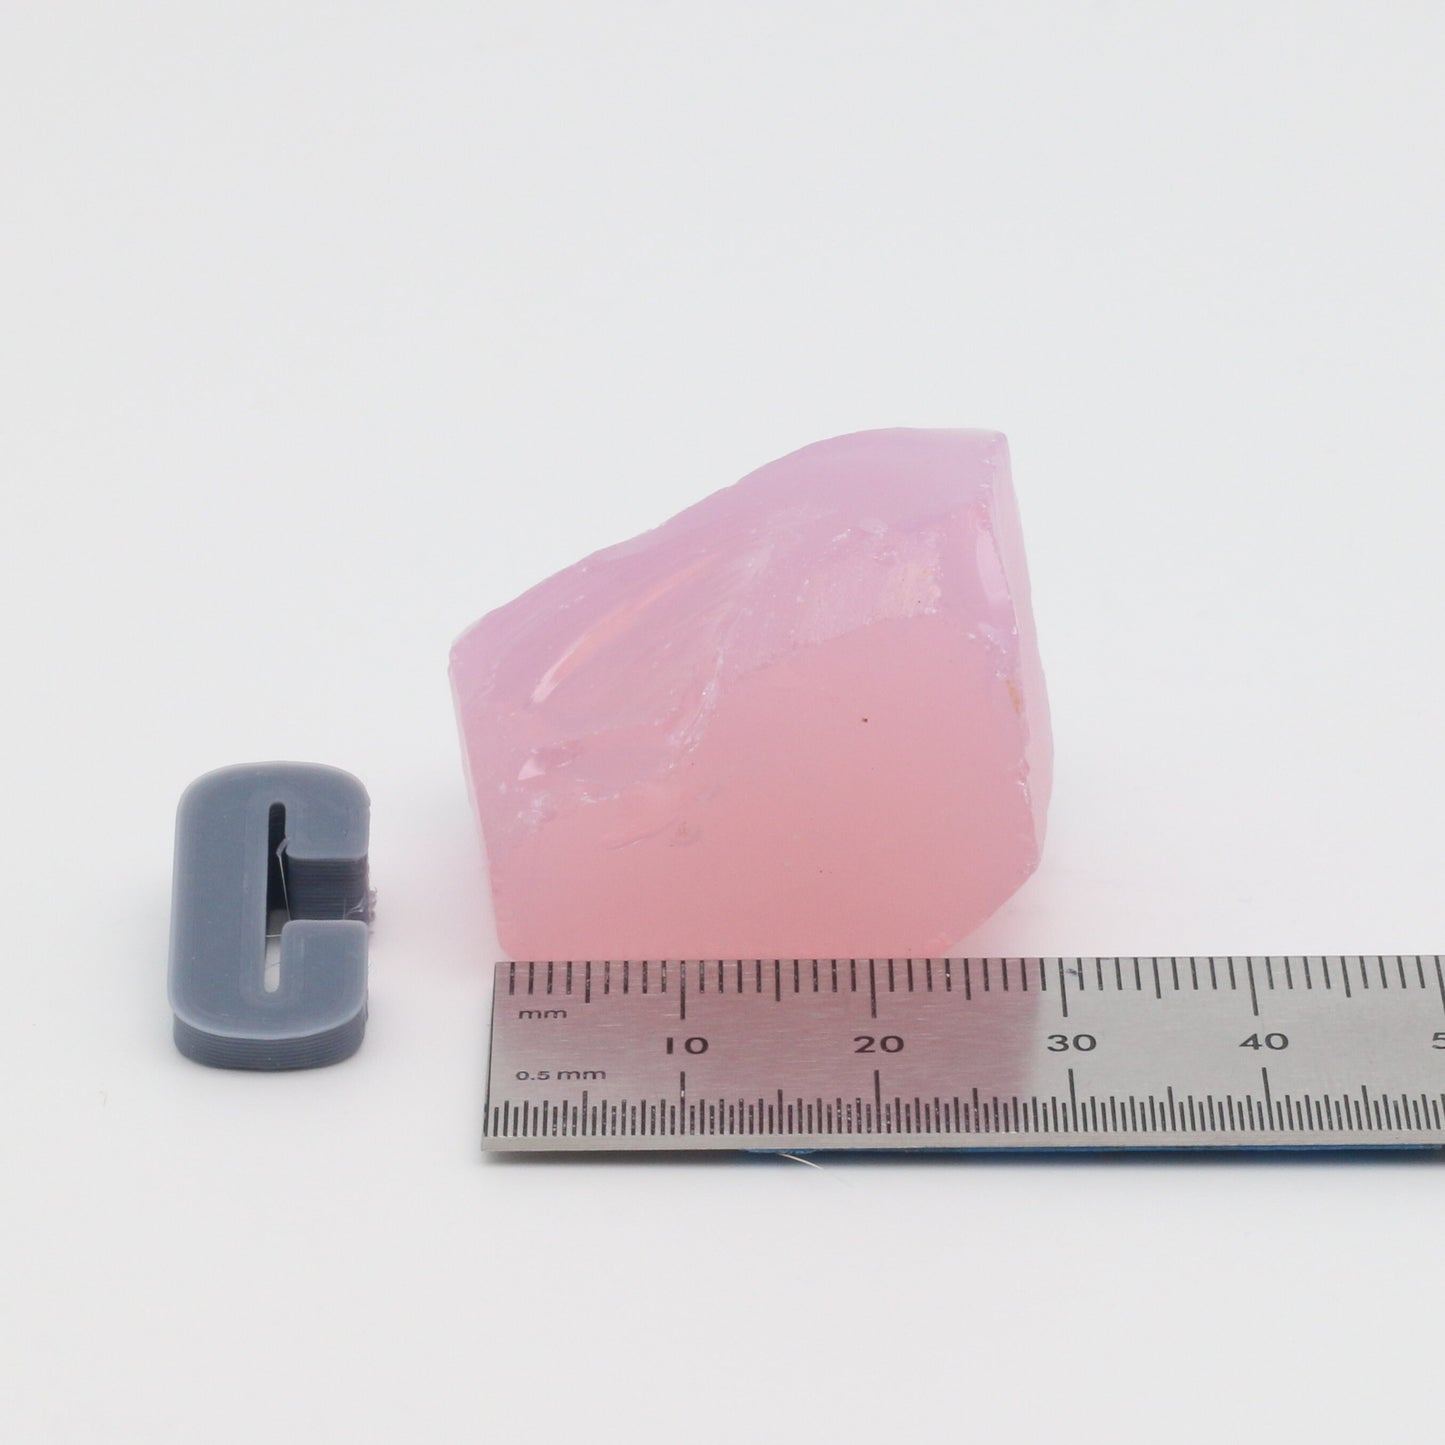 Pink Opal Nanosital Synthetic Lab Created Faceting Rough for Gem Cutting - #002 - Various Sizes